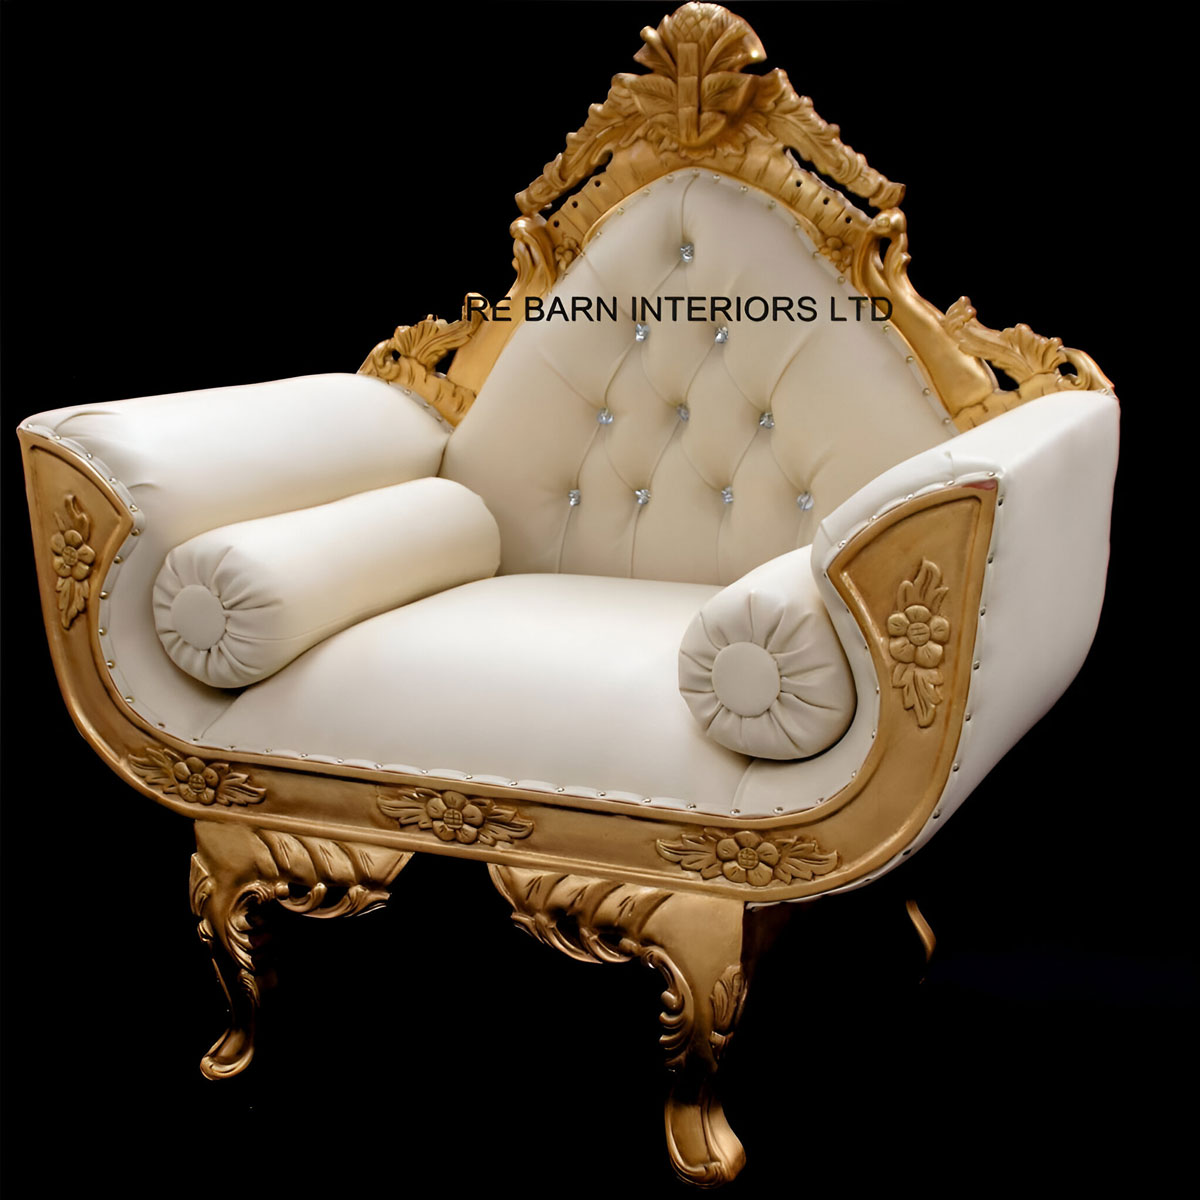 A Catherine Ornate Gold Royal Wedding 3 Piece Set Suite One Sofa And Two Chairs In Faux Cream Leather With Diamond Crystal Buttons 7 - Hampshire Barn Interiors - A Catherine Ornate Gold Royal Wedding 3 Piece Set / Suite (One Sofa And Two Chairs) In Faux Cream Leather With Diamond Crystal Buttons -